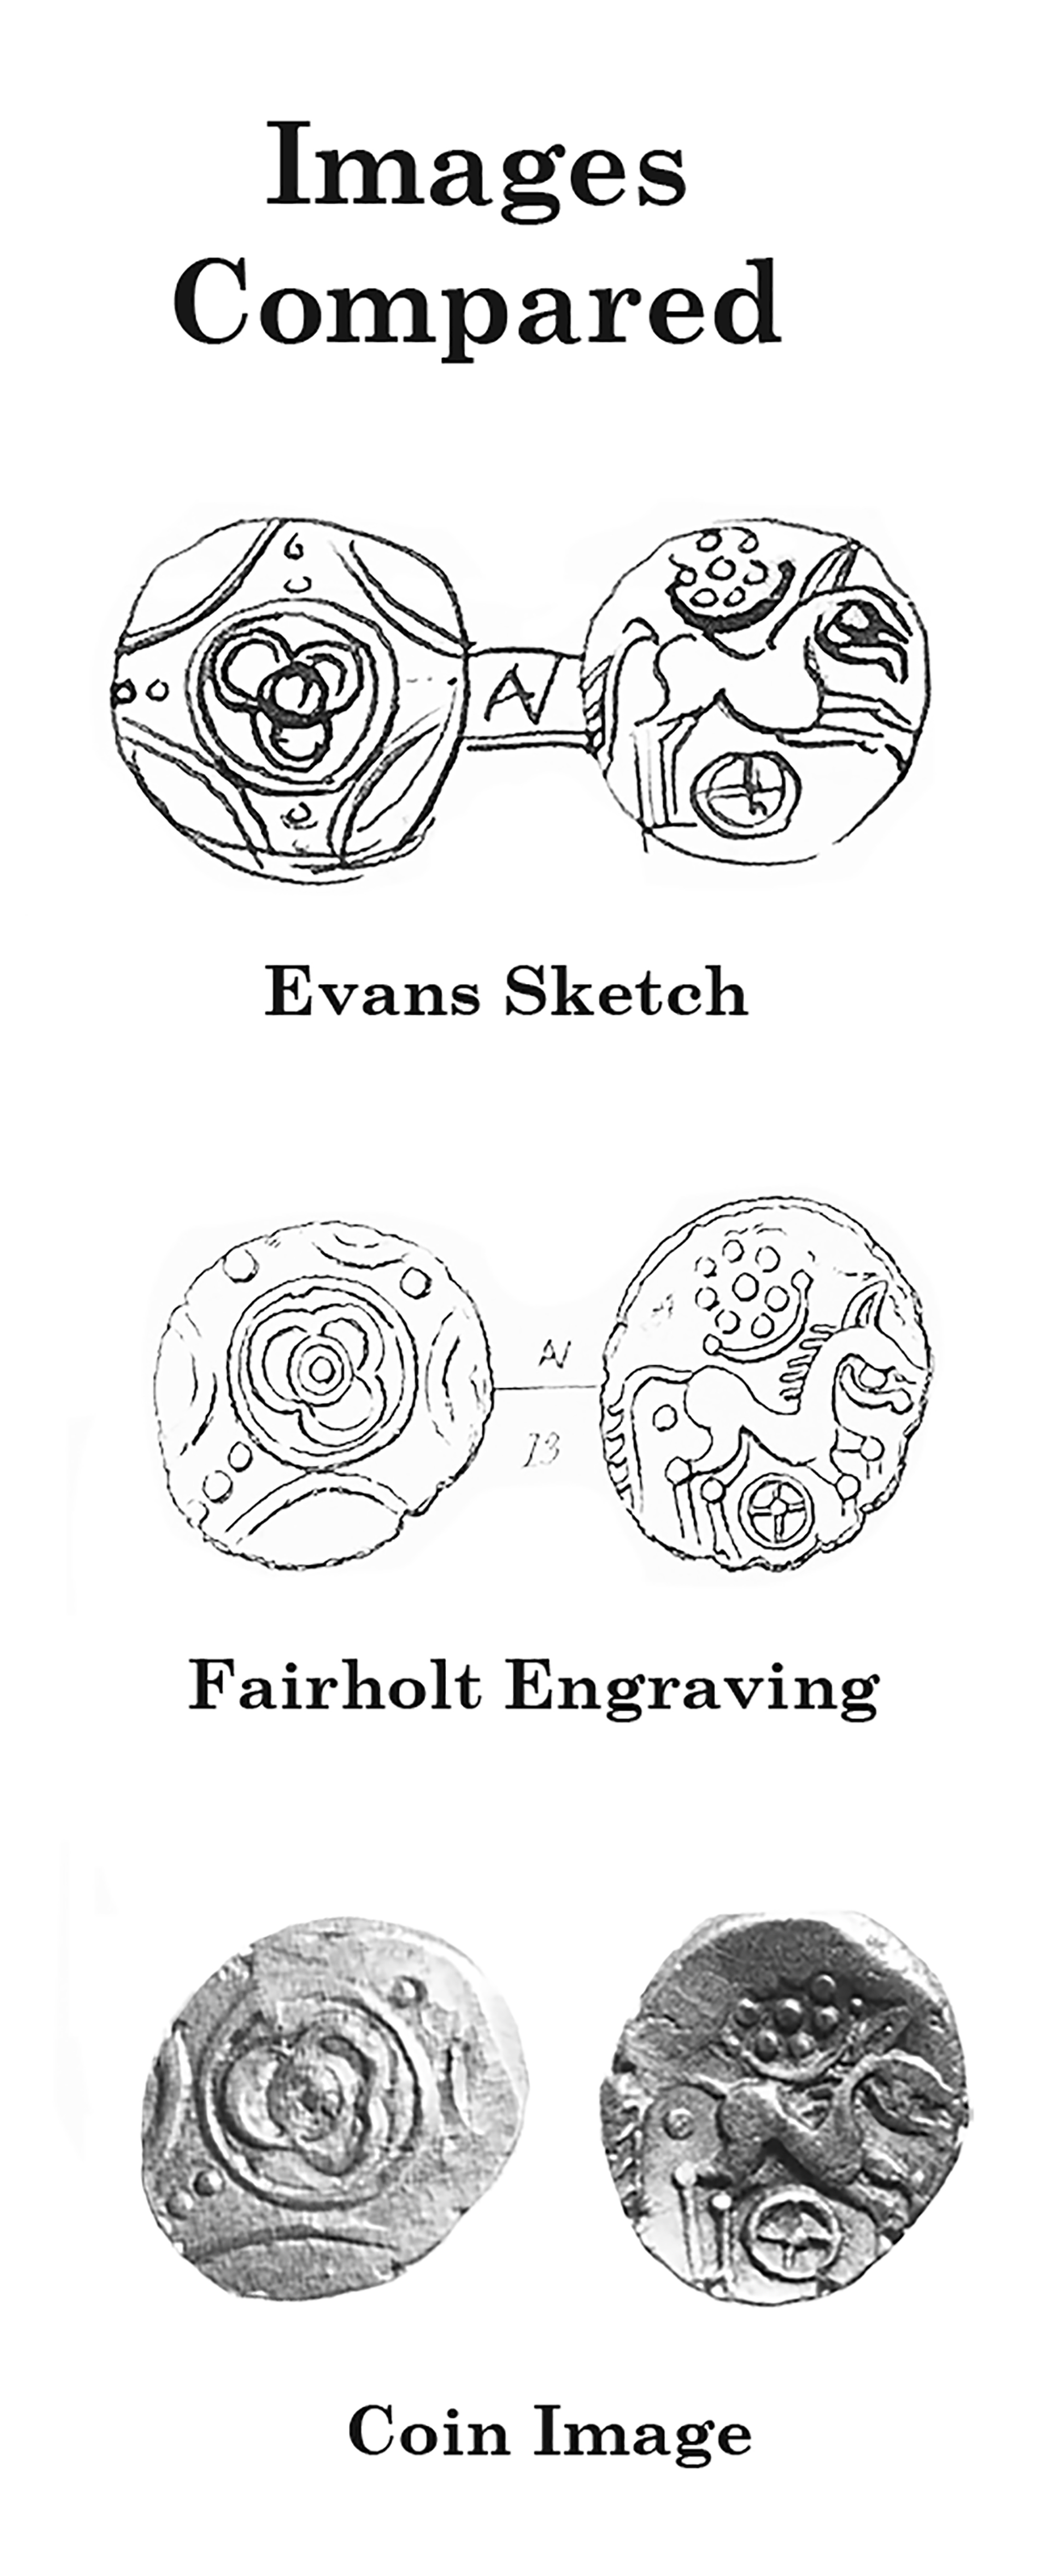 Evans Sketch – Fairholt Engraving – Coin Image Compared